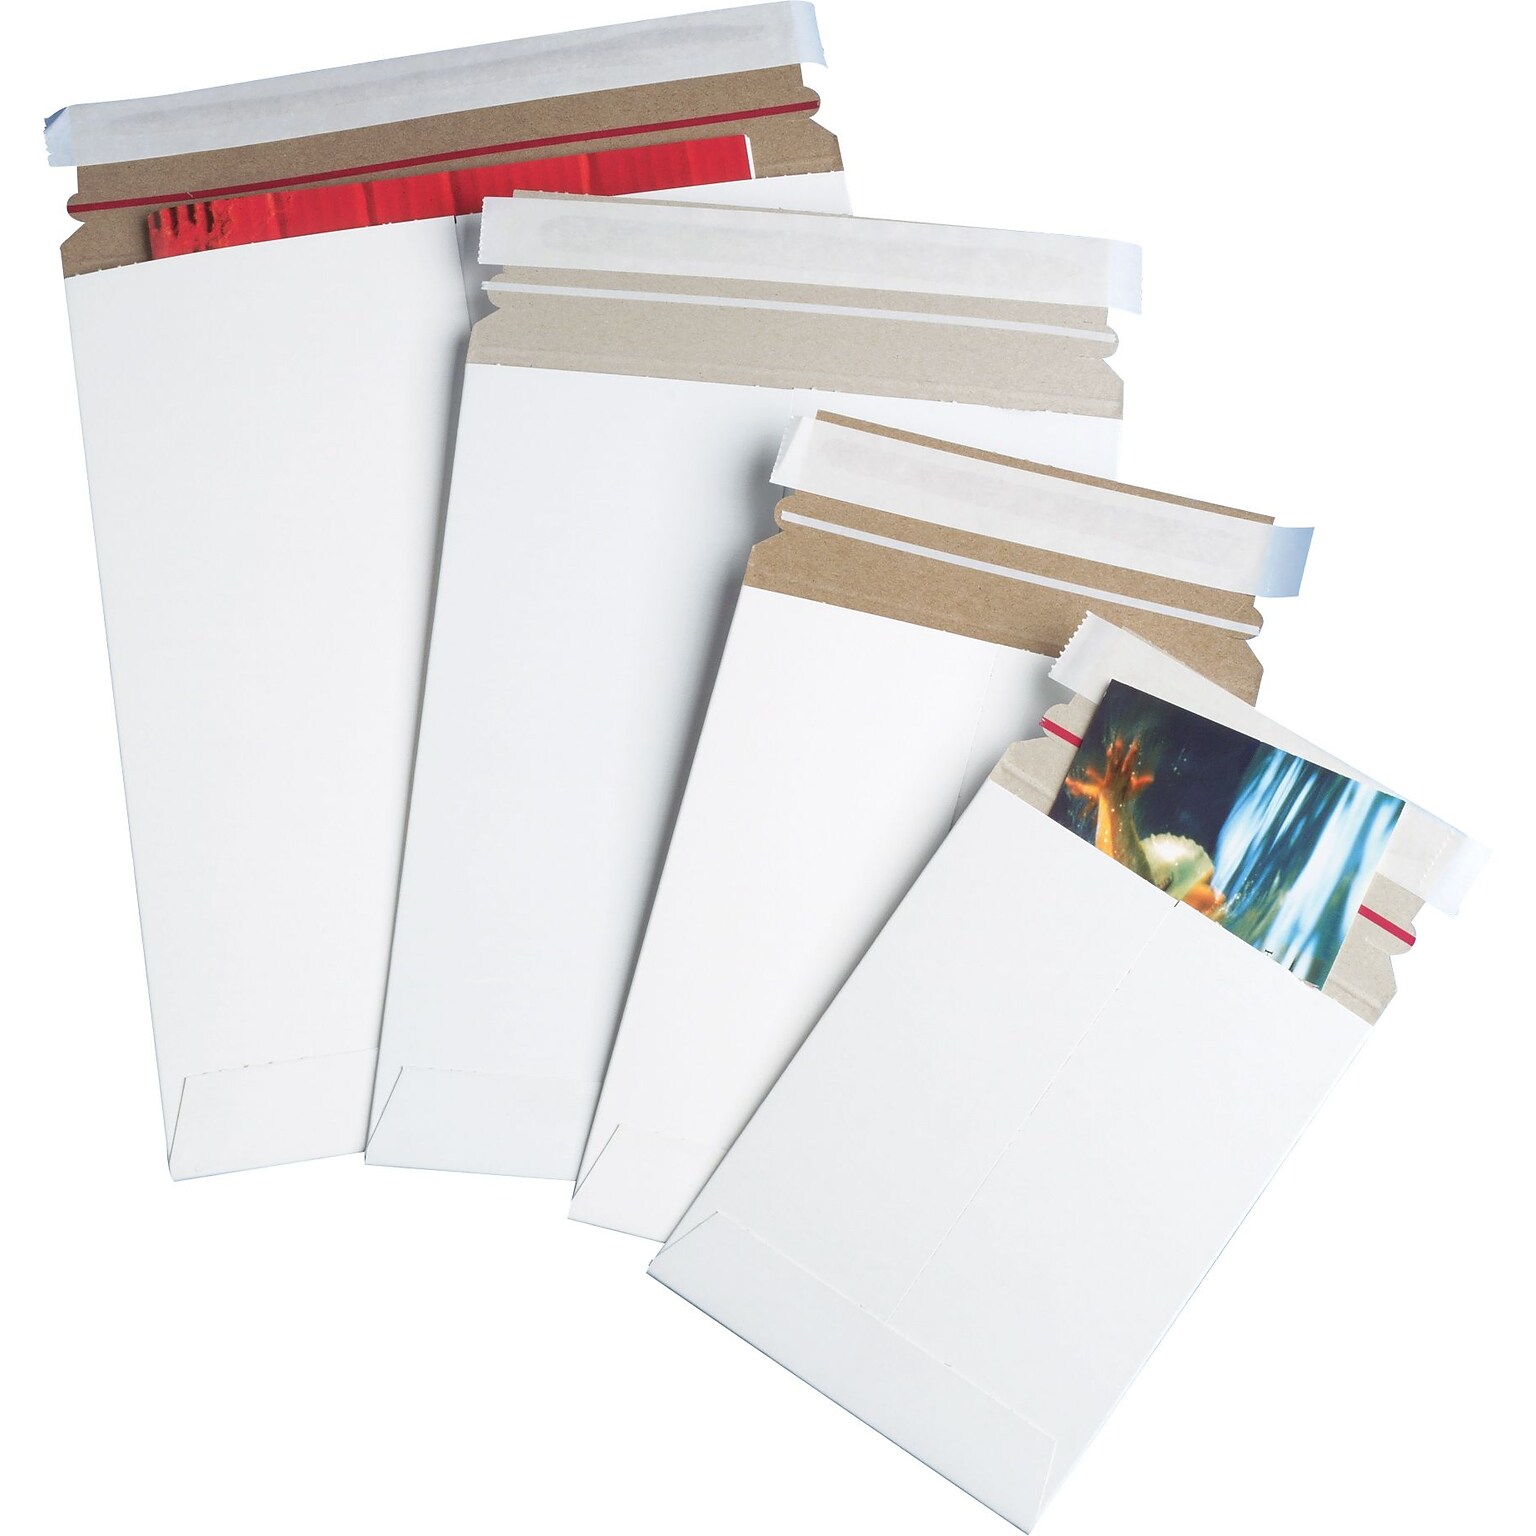 StayFlat Mailers, 5-1/8 x 5-1/8, White, 200/Case